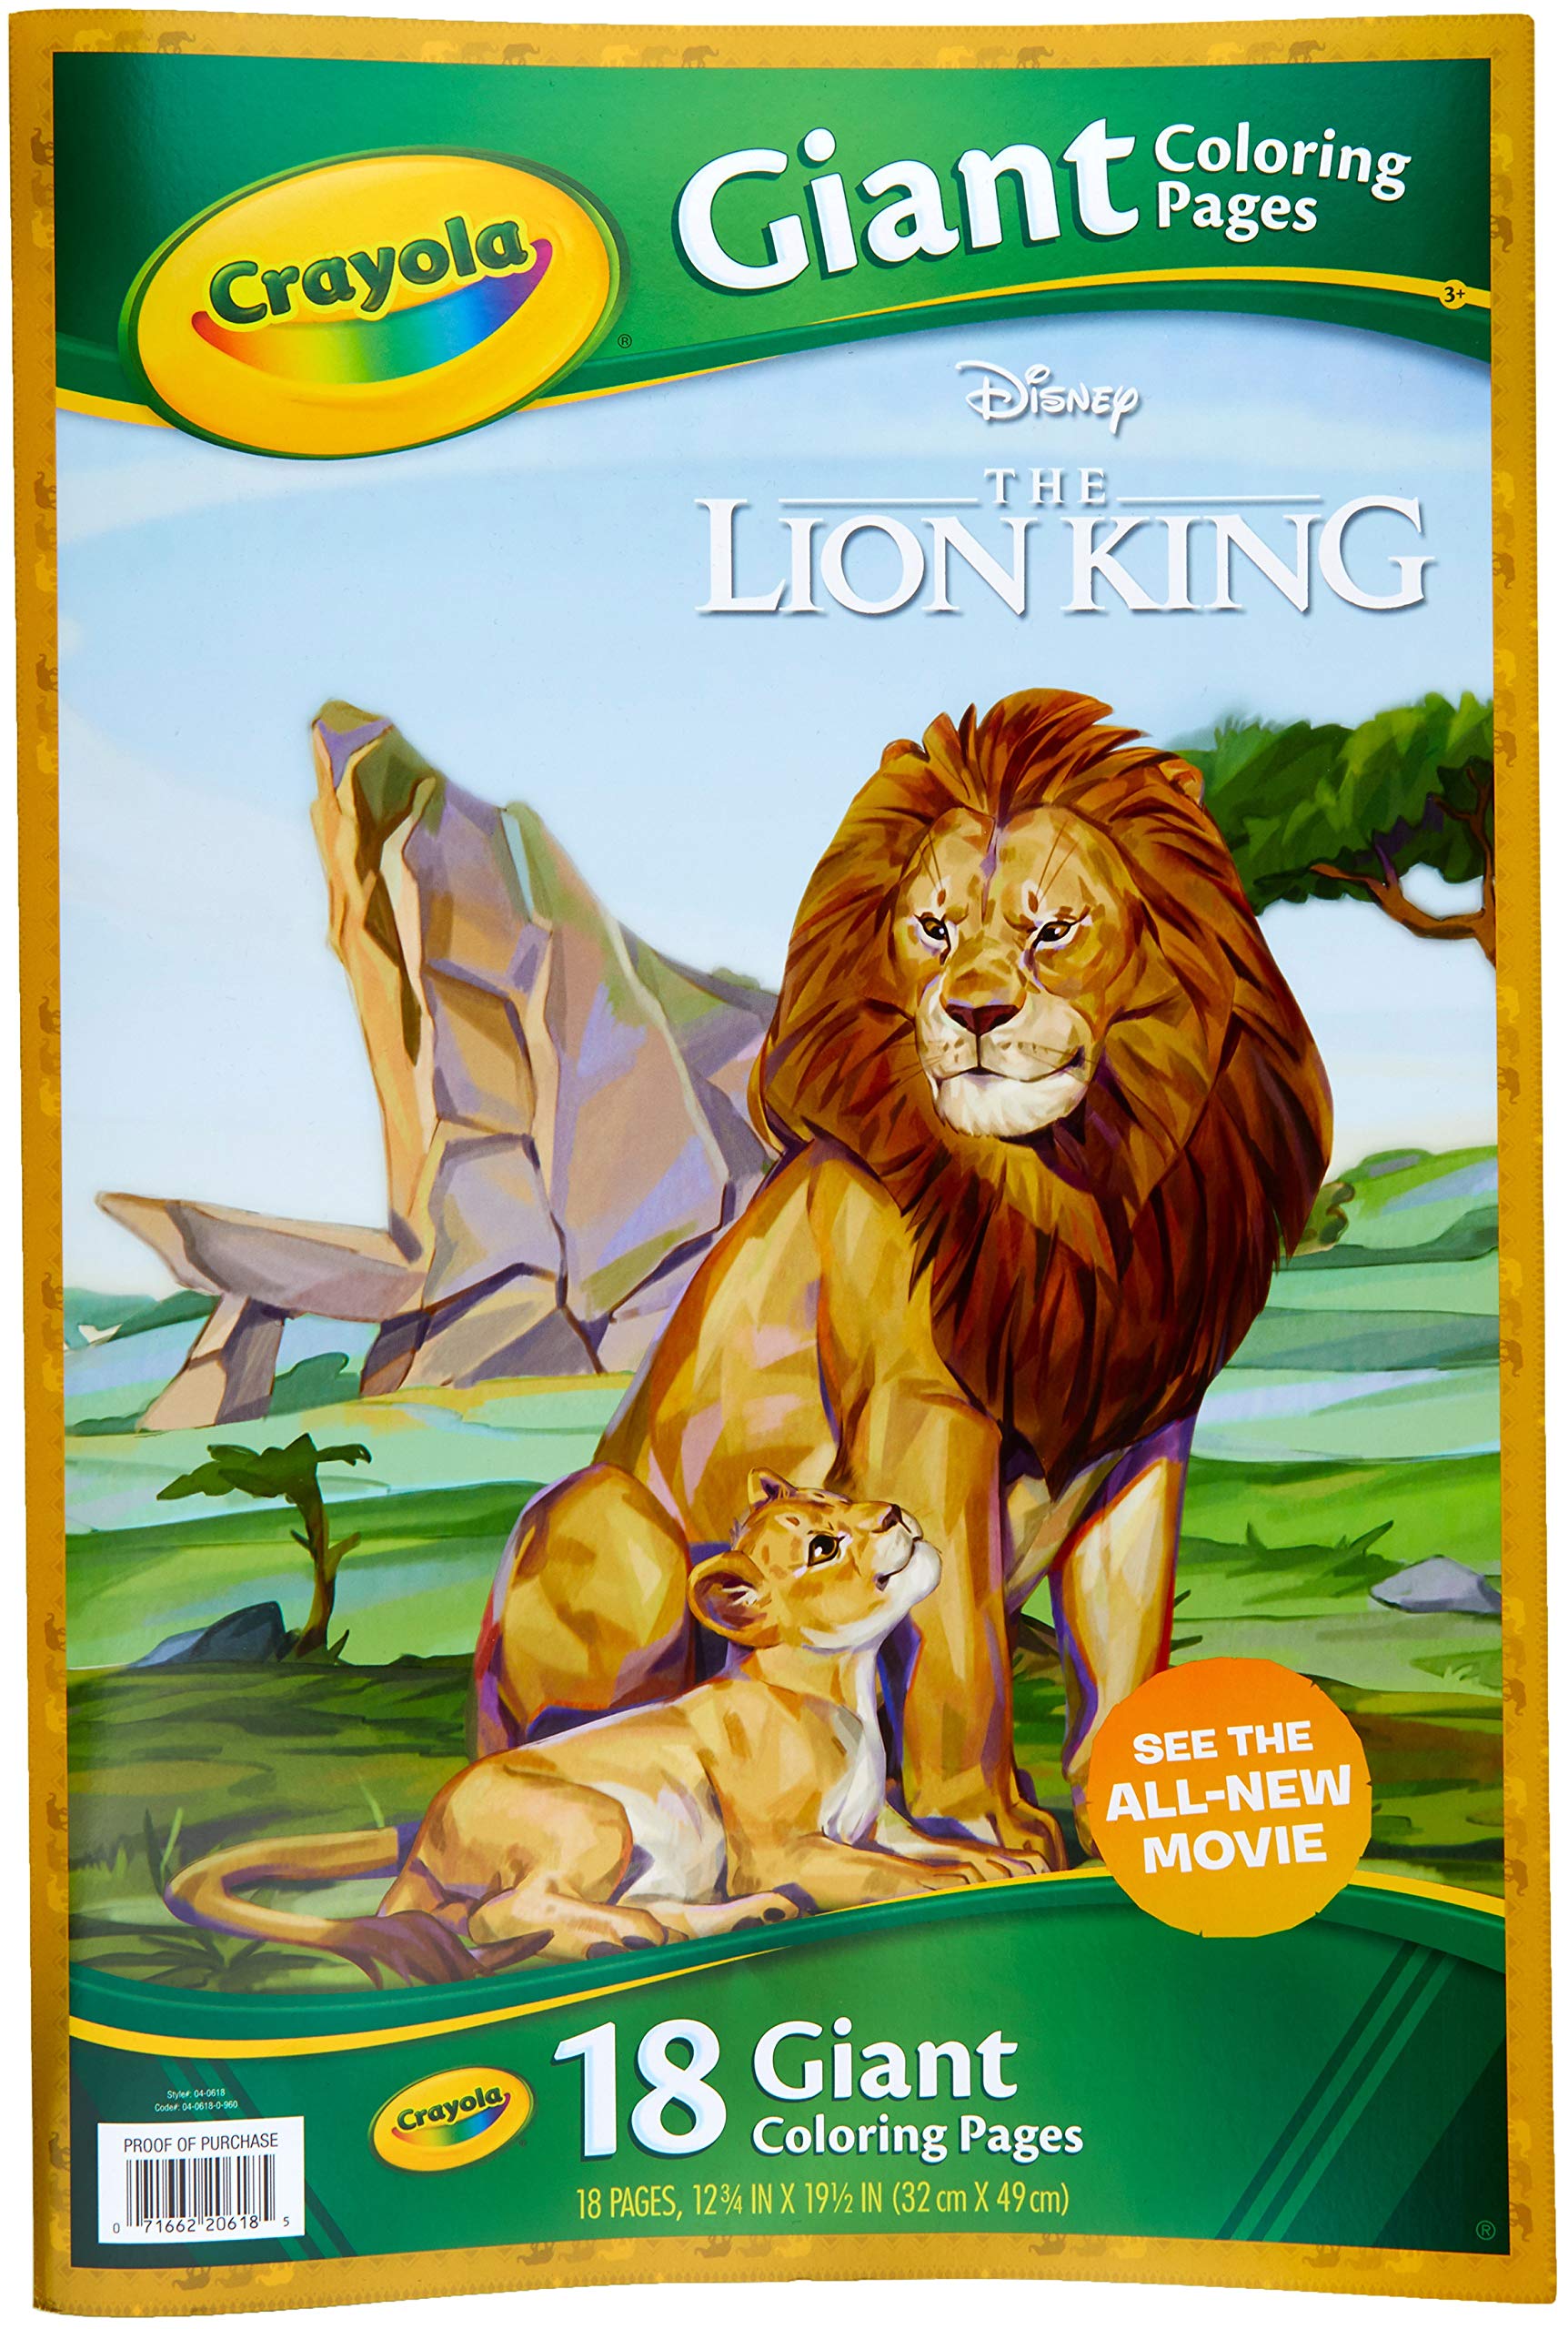 Crayola giant coloring book lion king arts crafts sewing